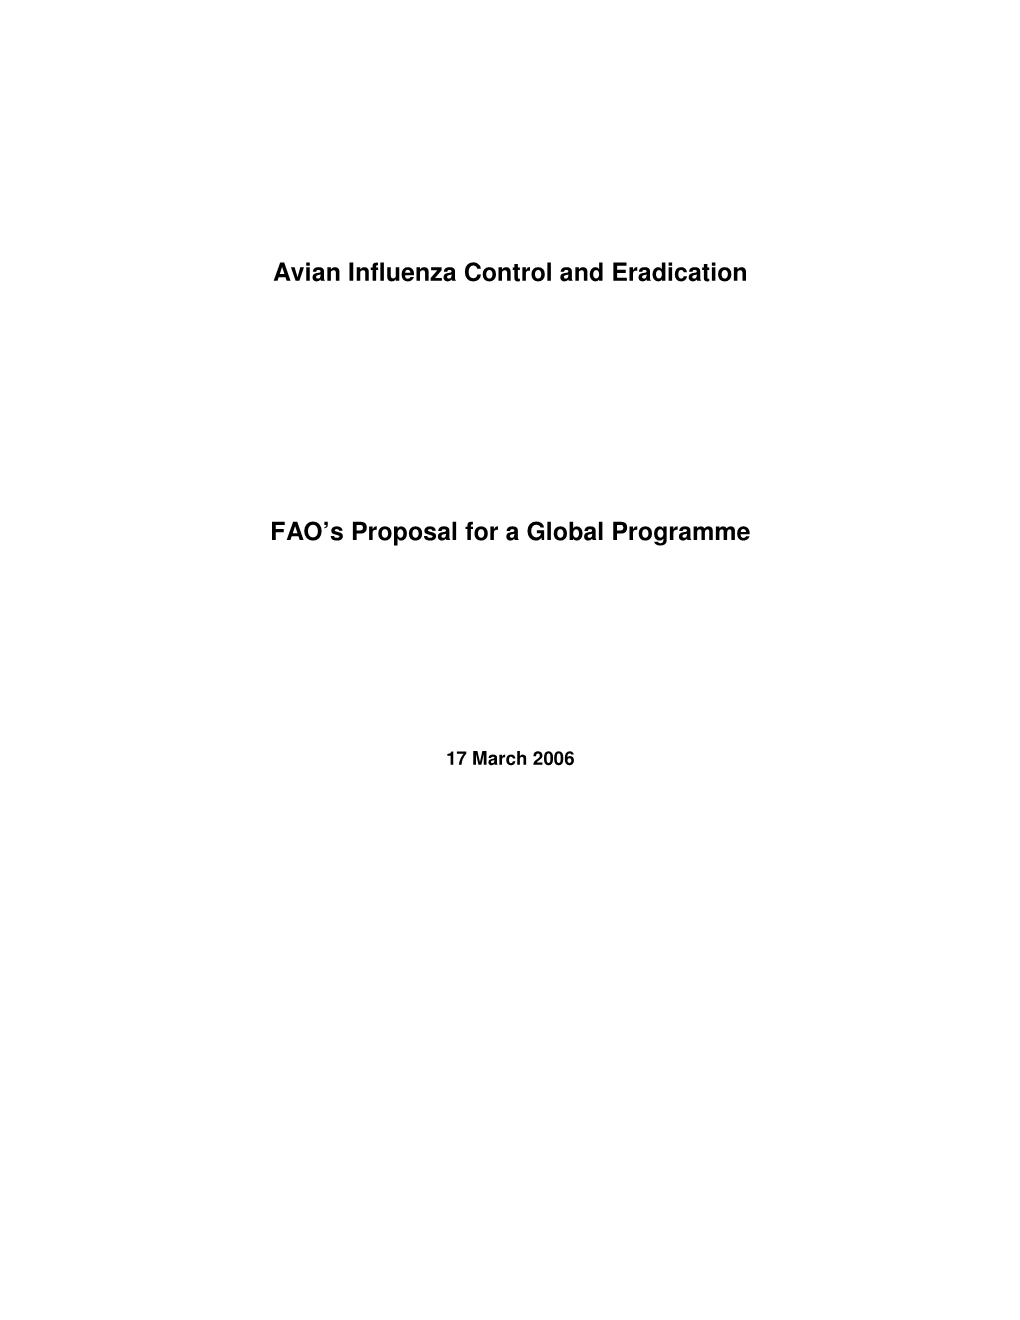 FAO's Proposal for a Global Programme